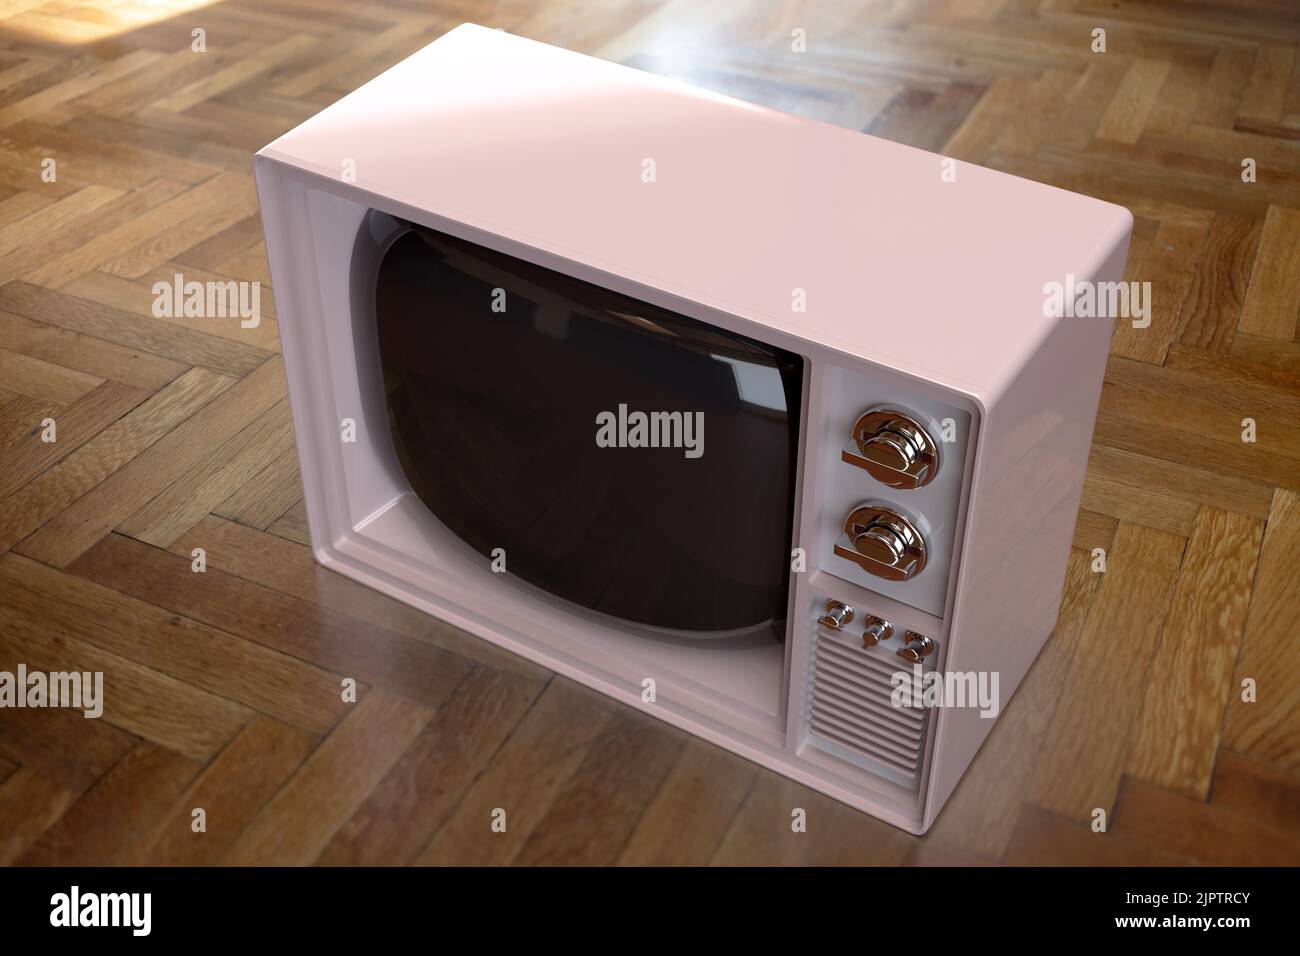 Nostalgia concept. Retro TV on wooden floor background. Vintage old fashioned white analog television for movie, news, broadcast. Overhead view. 3d re Stock Photo